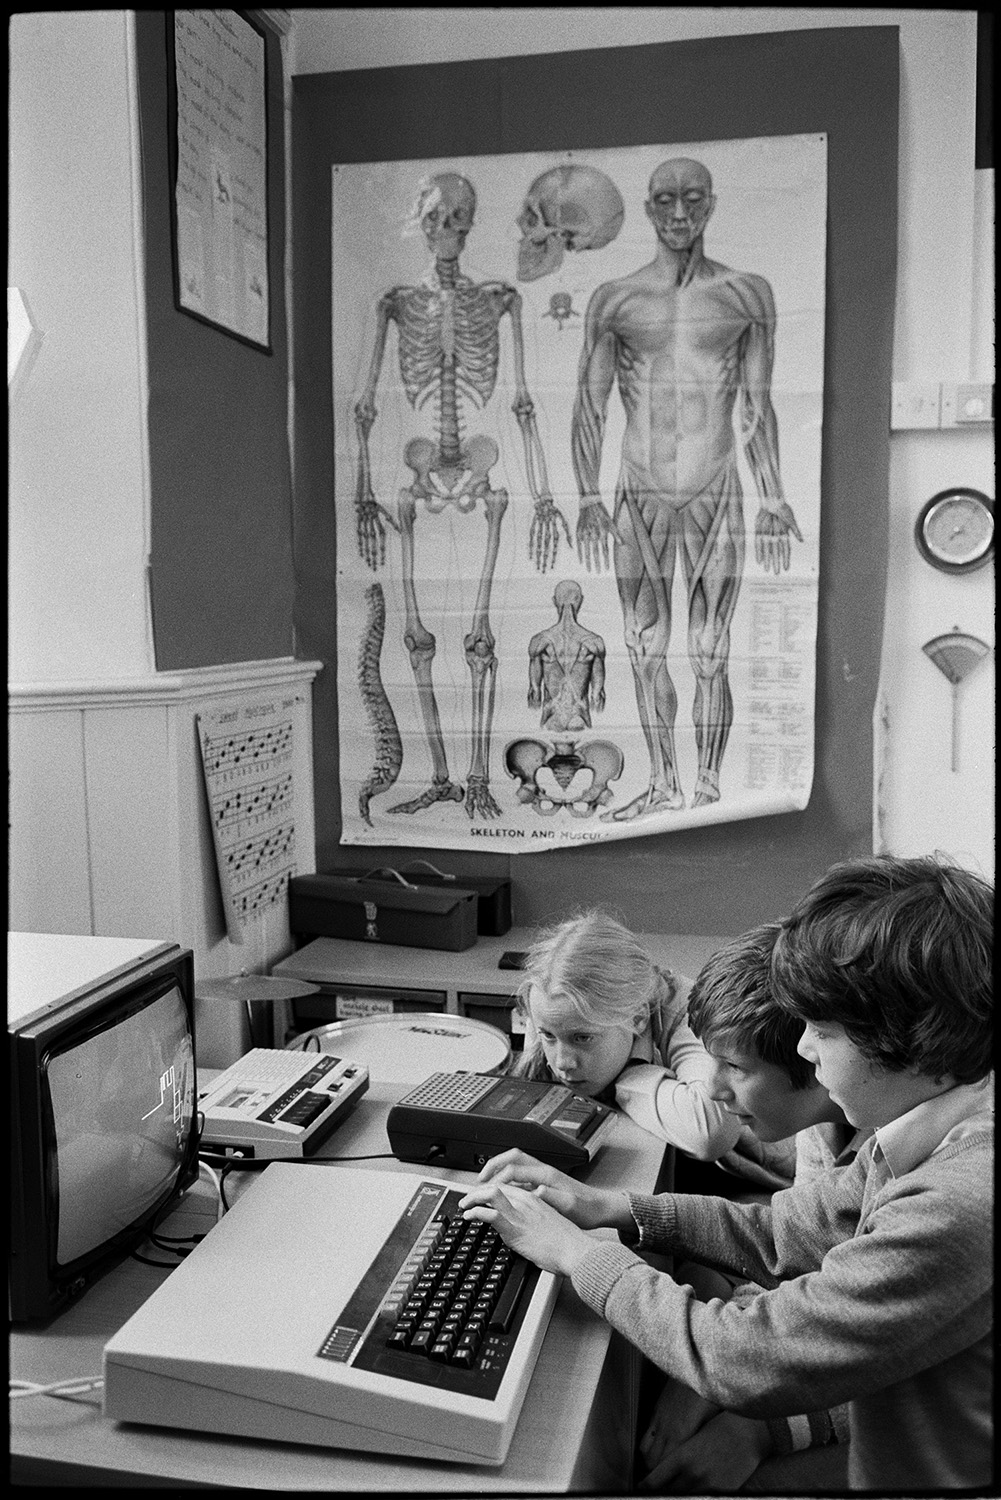 Schoolchildren using computer BBC Micro.
[Three children operating a BBC Micro computer at Dolton Primary School with a large poster of a human skeleton mounted on the wall behind them.]